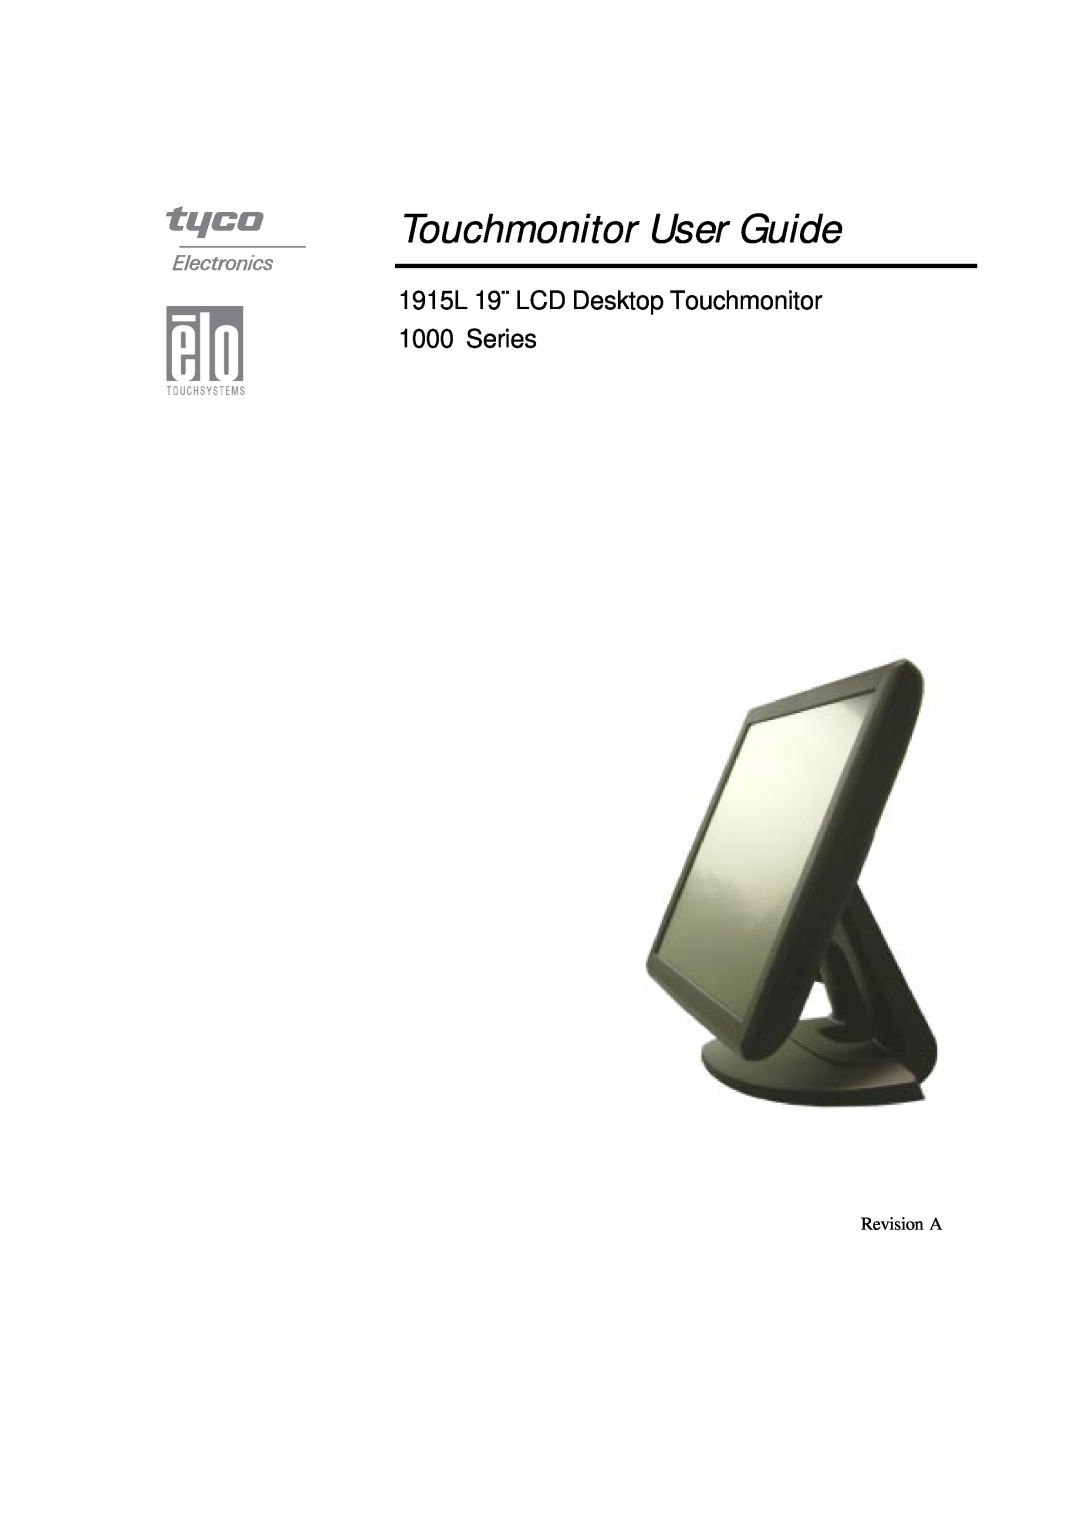 Elo TouchSystems manual Touchmonitor User Guide, 1915L 19¨ LCD Desktop Touchmonitor 1000 Series 